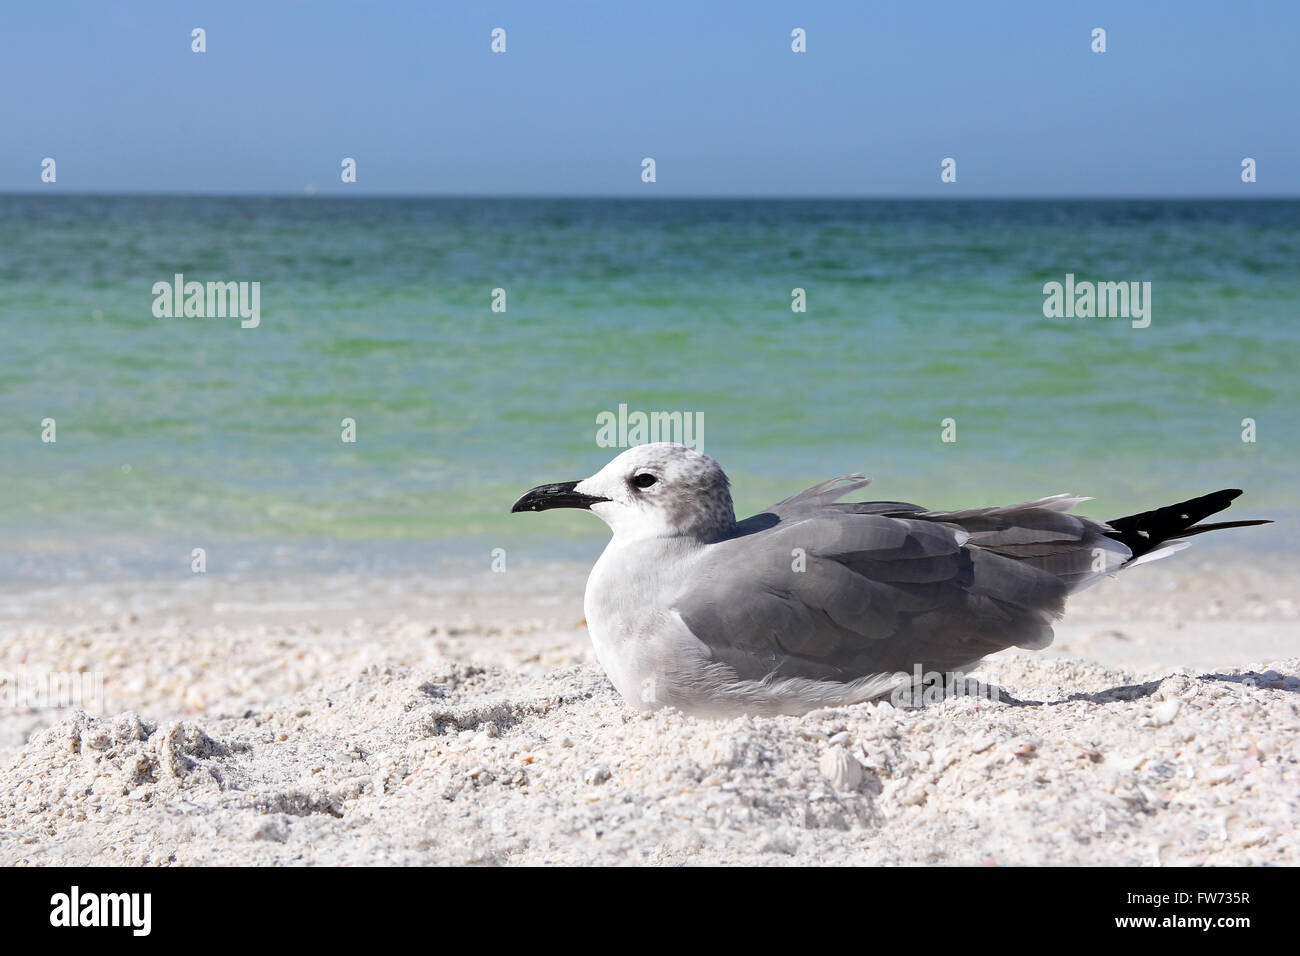 A gray Seagull shore bird is resting on the beach in front of the Gulf of Mexico Ocean in Florida on white sand. Stock Photo